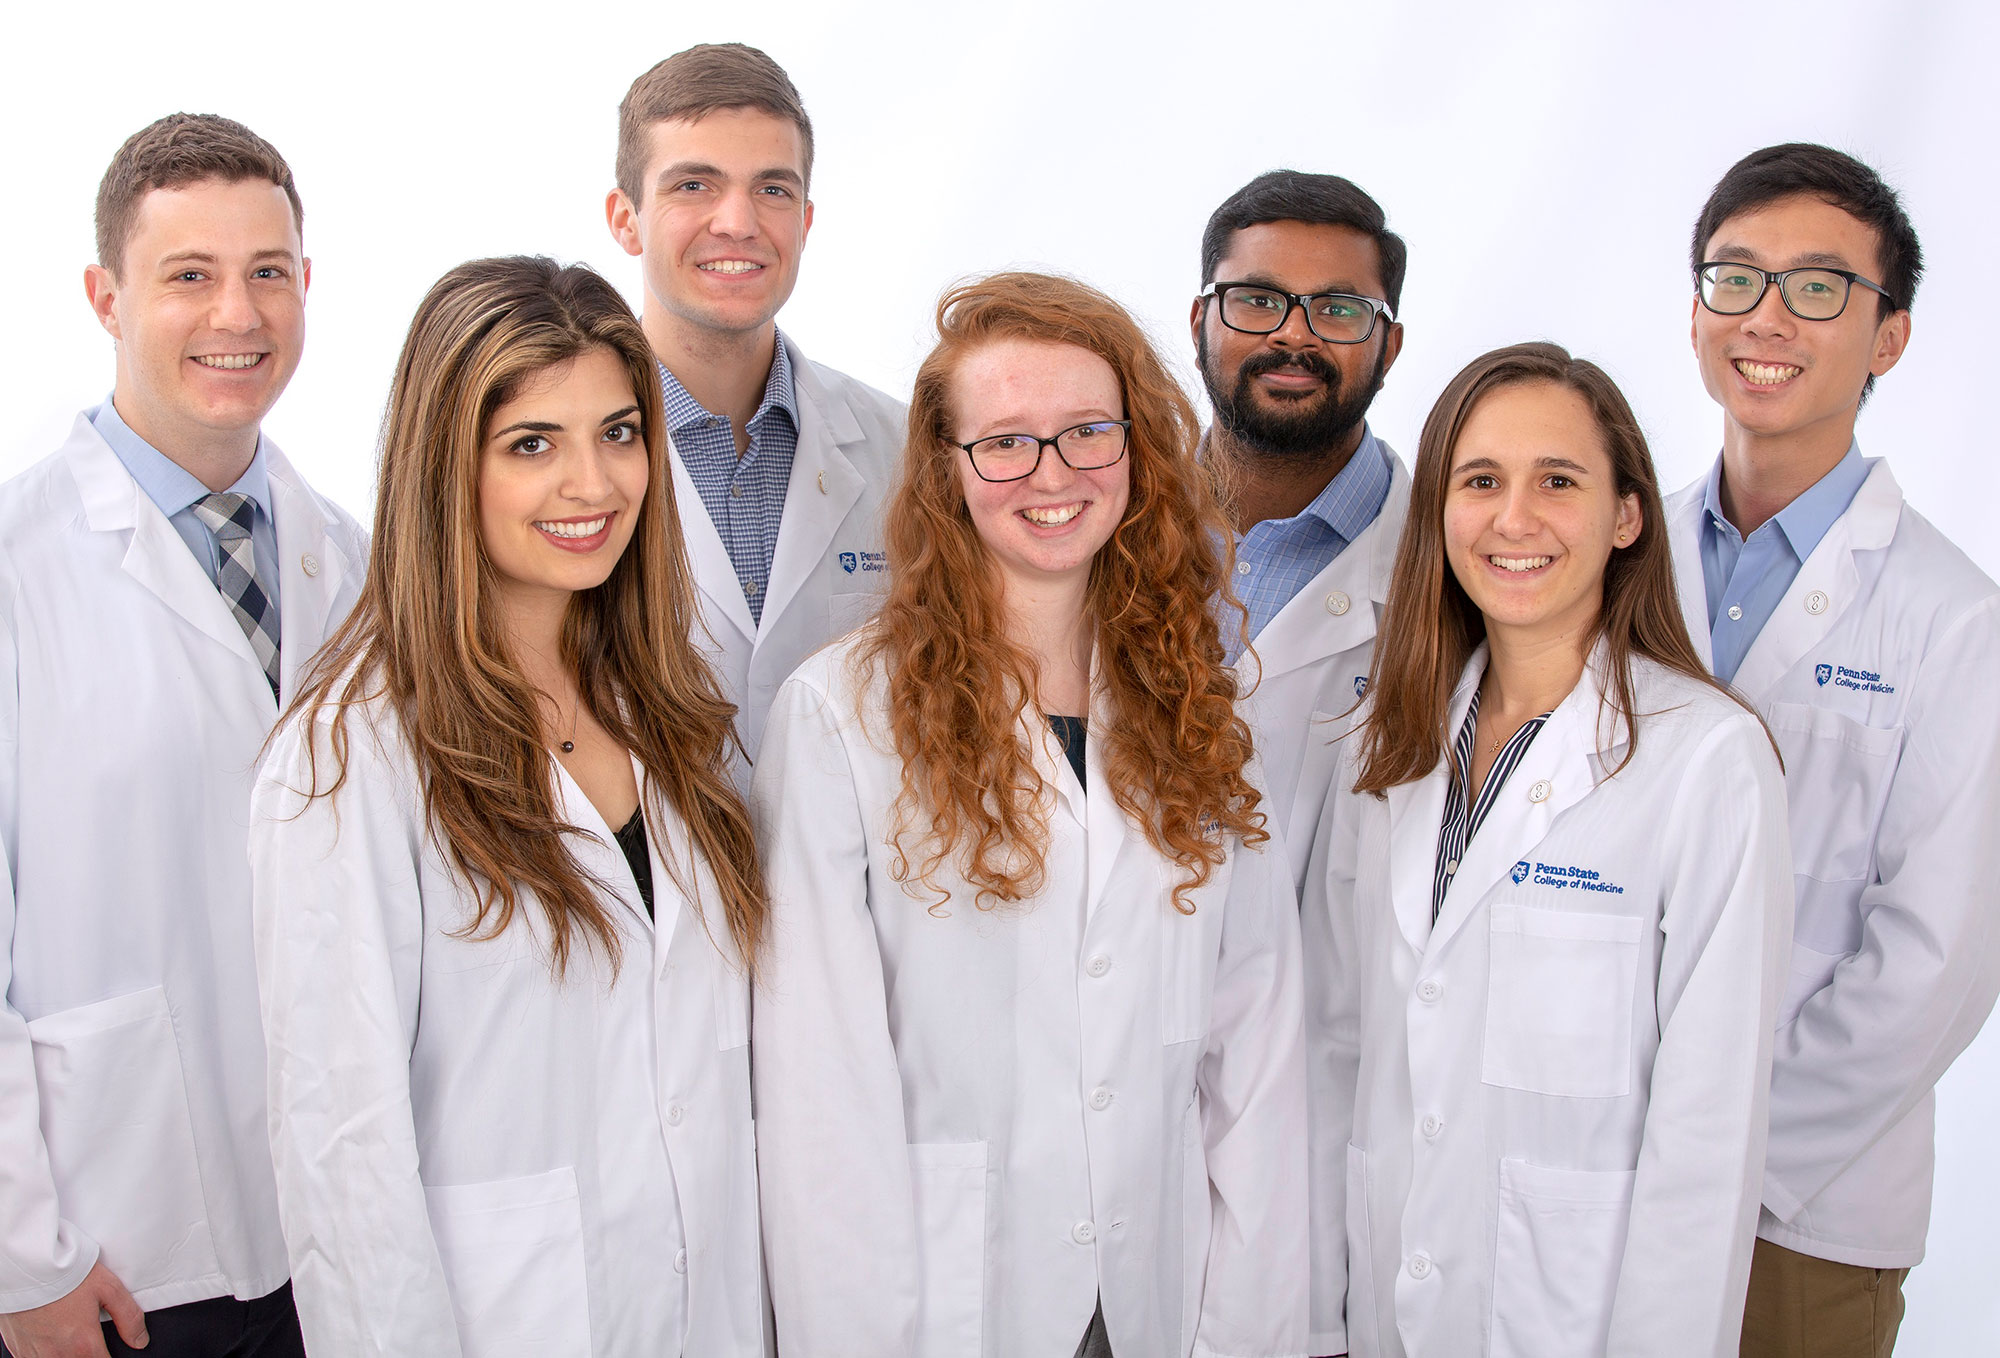 A group of seven college students are seen wearing white medical coats against a professional photo backdrop.